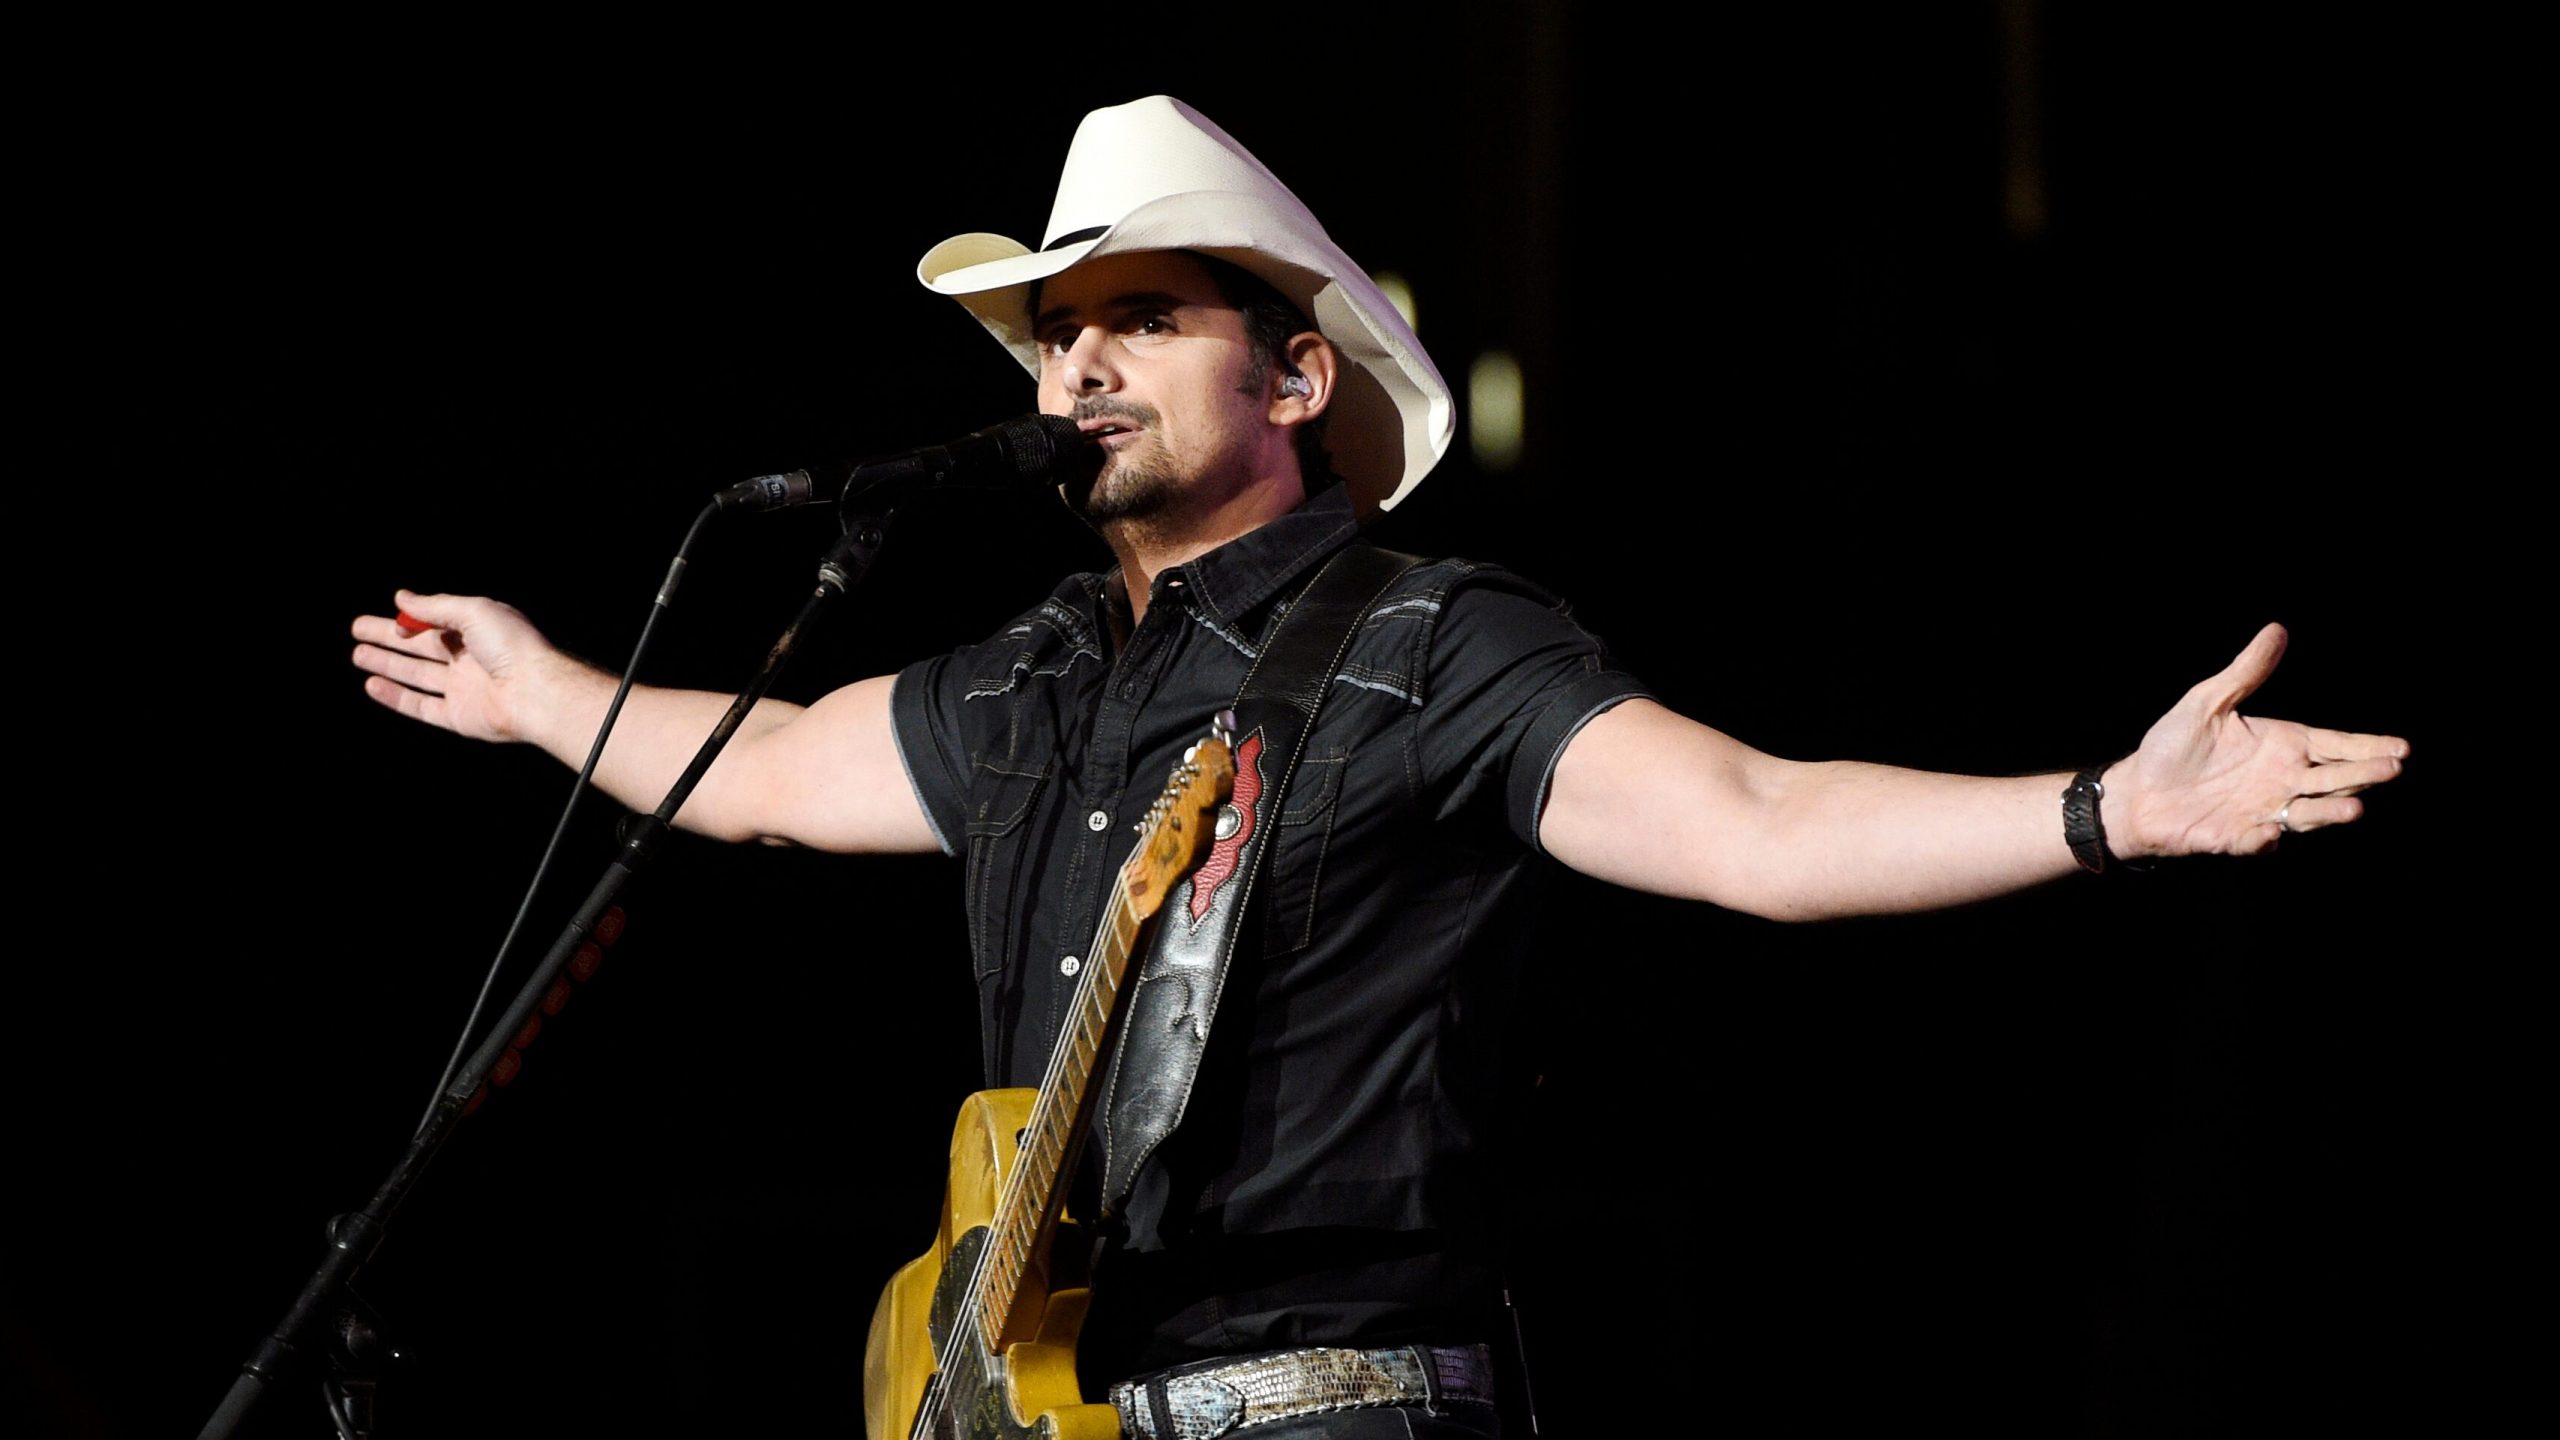 Brad Paisley surprises fans by joining virtual happy hours after dropping brand-new song for frontline employees